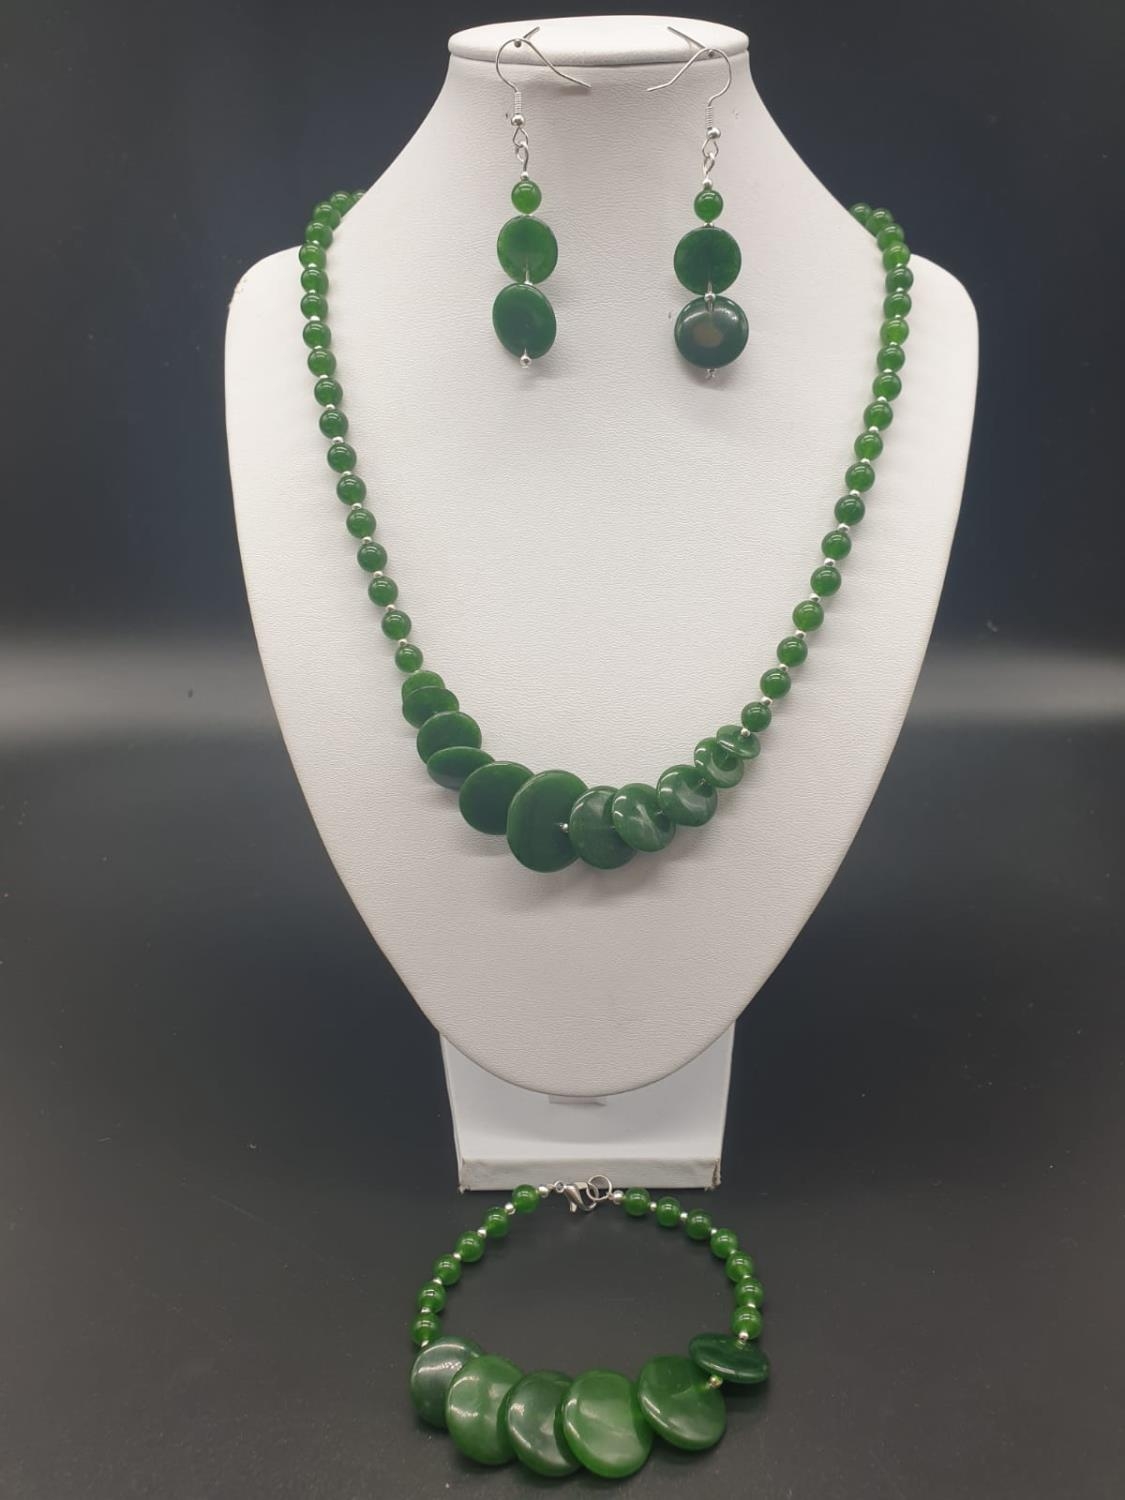 A modern spinach green jade necklace, bracelet and earrings set in a presentation box. Necklace - Image 2 of 15